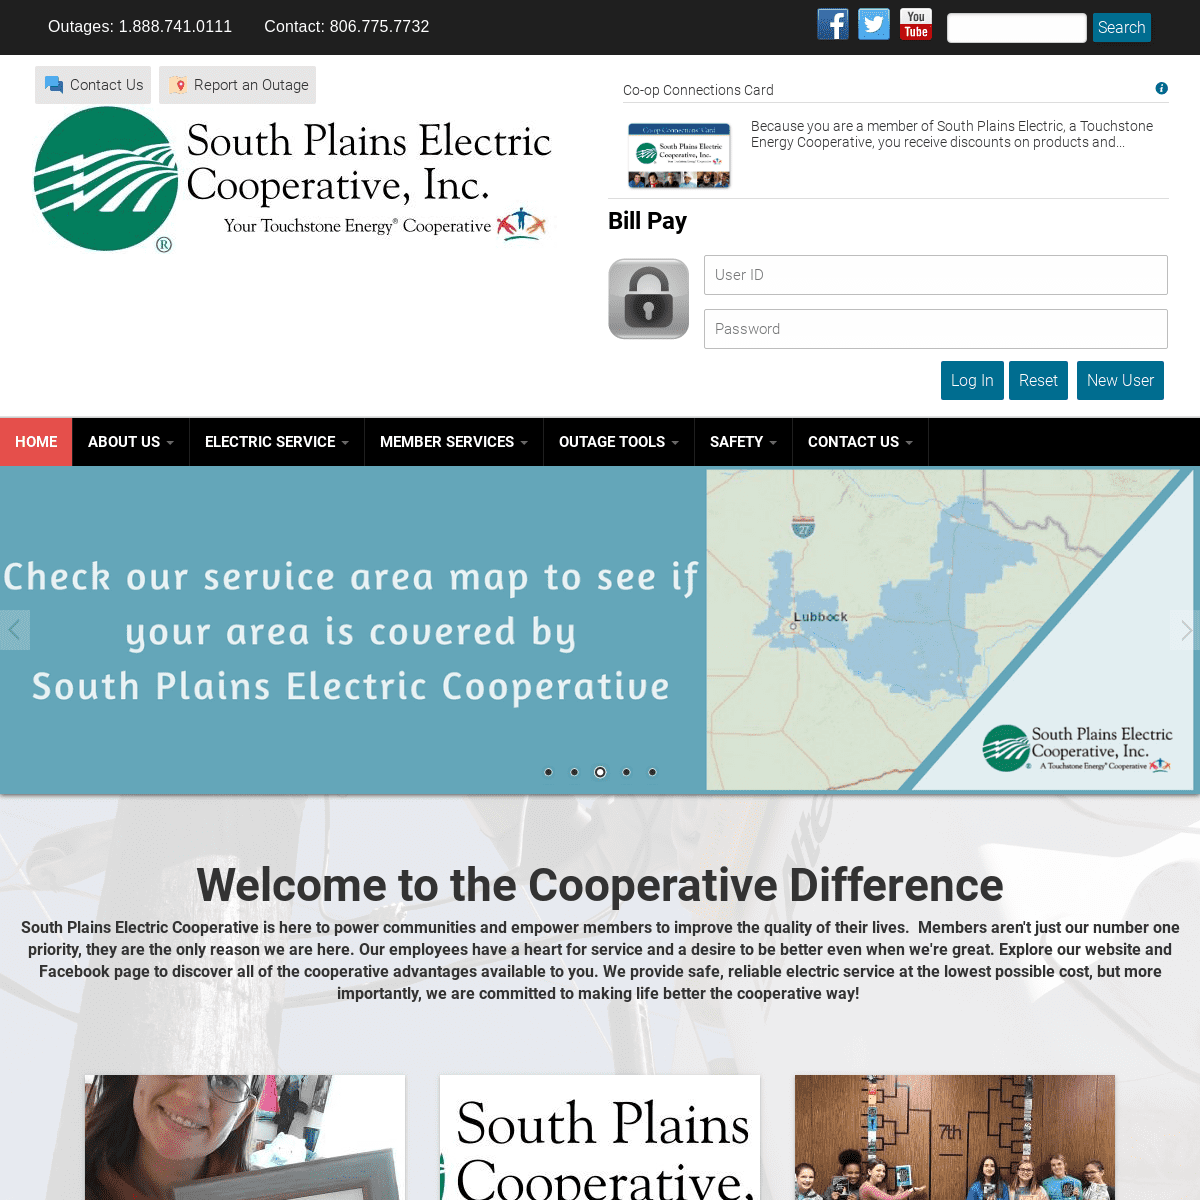 A complete backup of southplainselectric.com